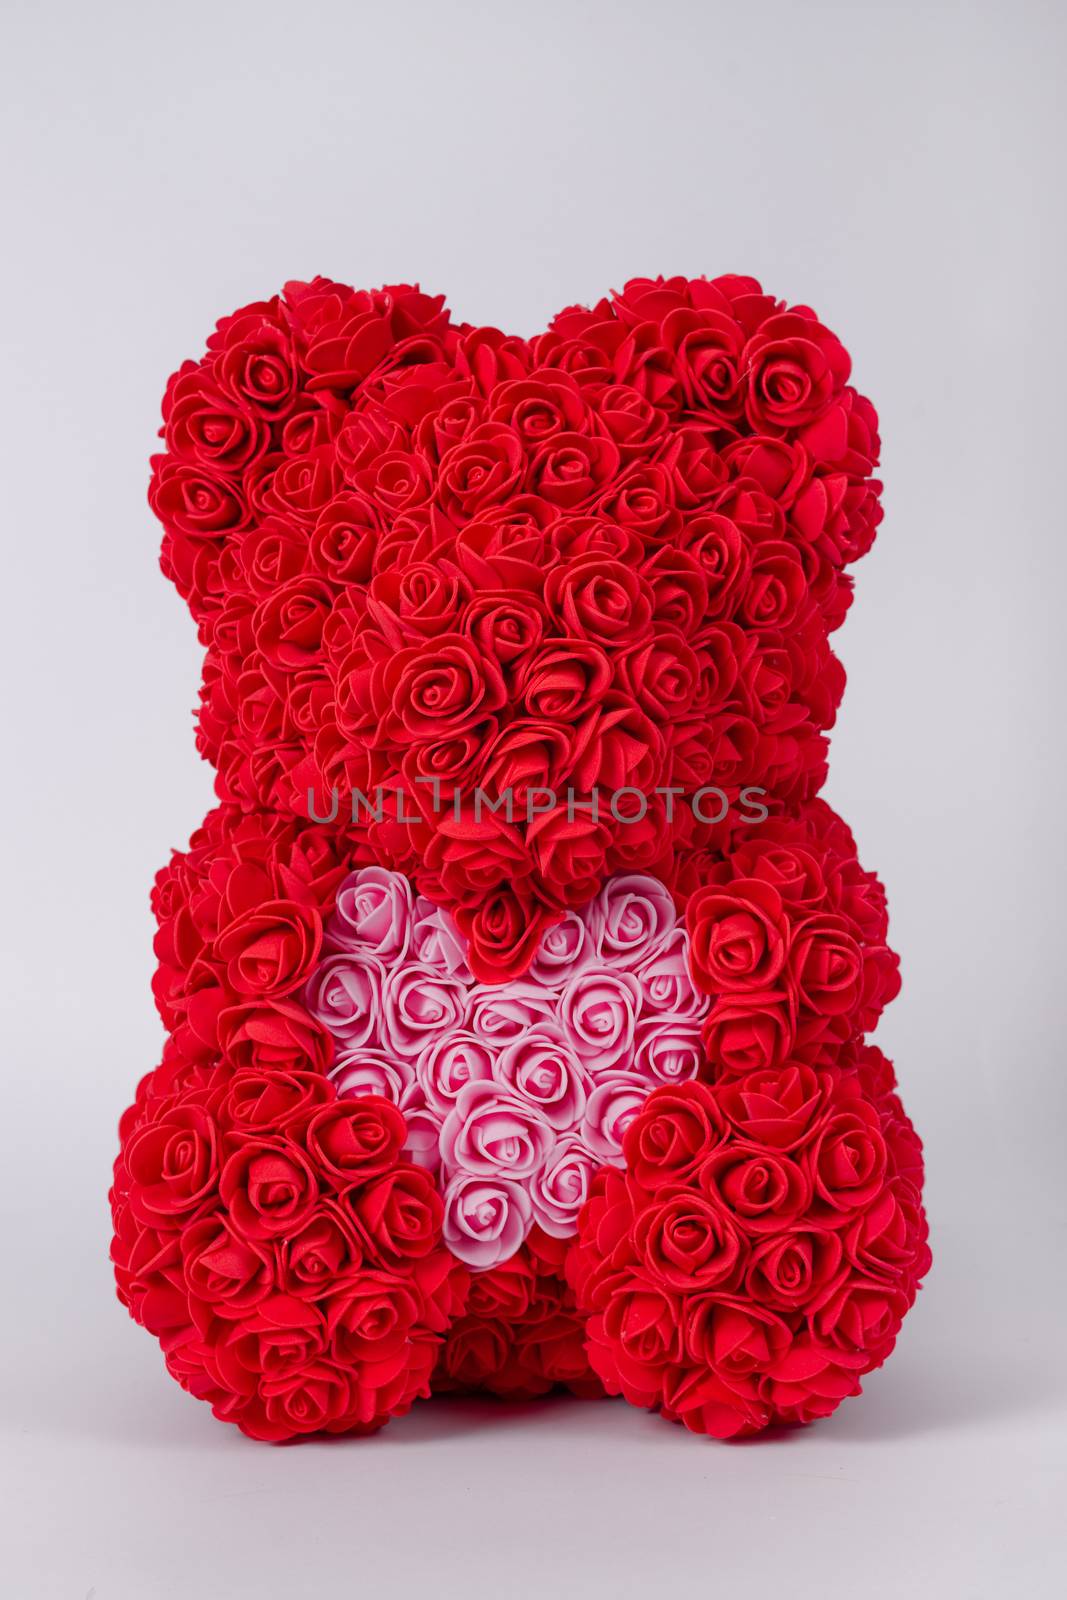 Red  teddy bear toy of foamirane roses. Pink heart in teddy paws. Stock photo isolated on white background. by alexsdriver